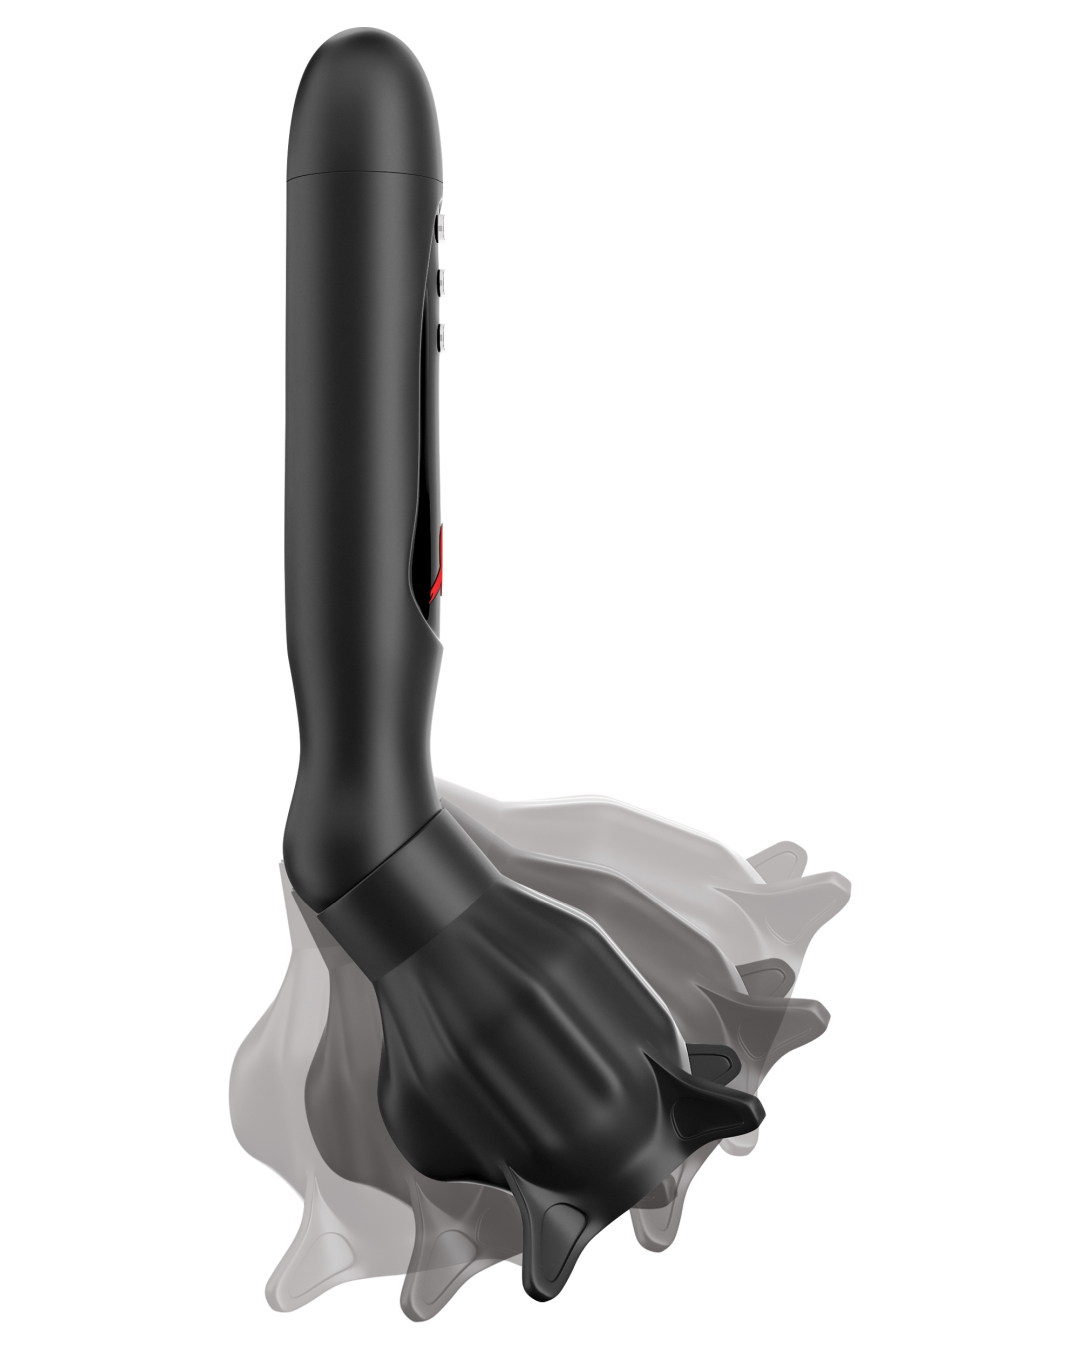 Poseable PDX Roto Sucker Suction and Vibration Penis Stroker 